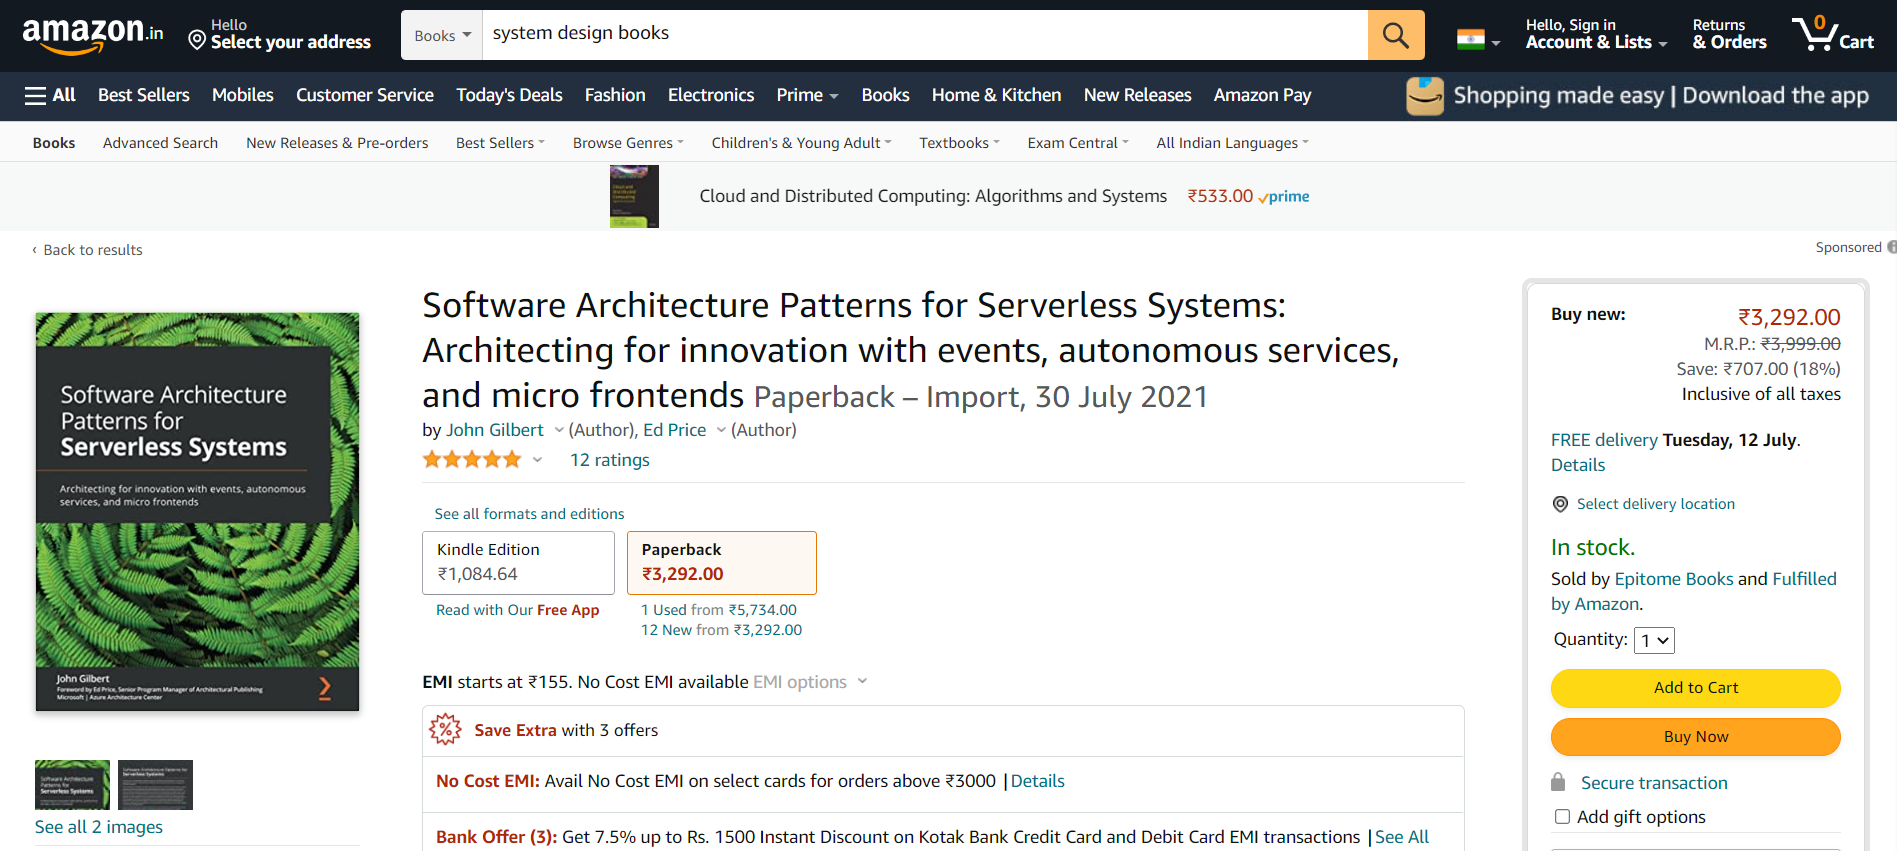 Software Architecture Patterns For Serverless Systems